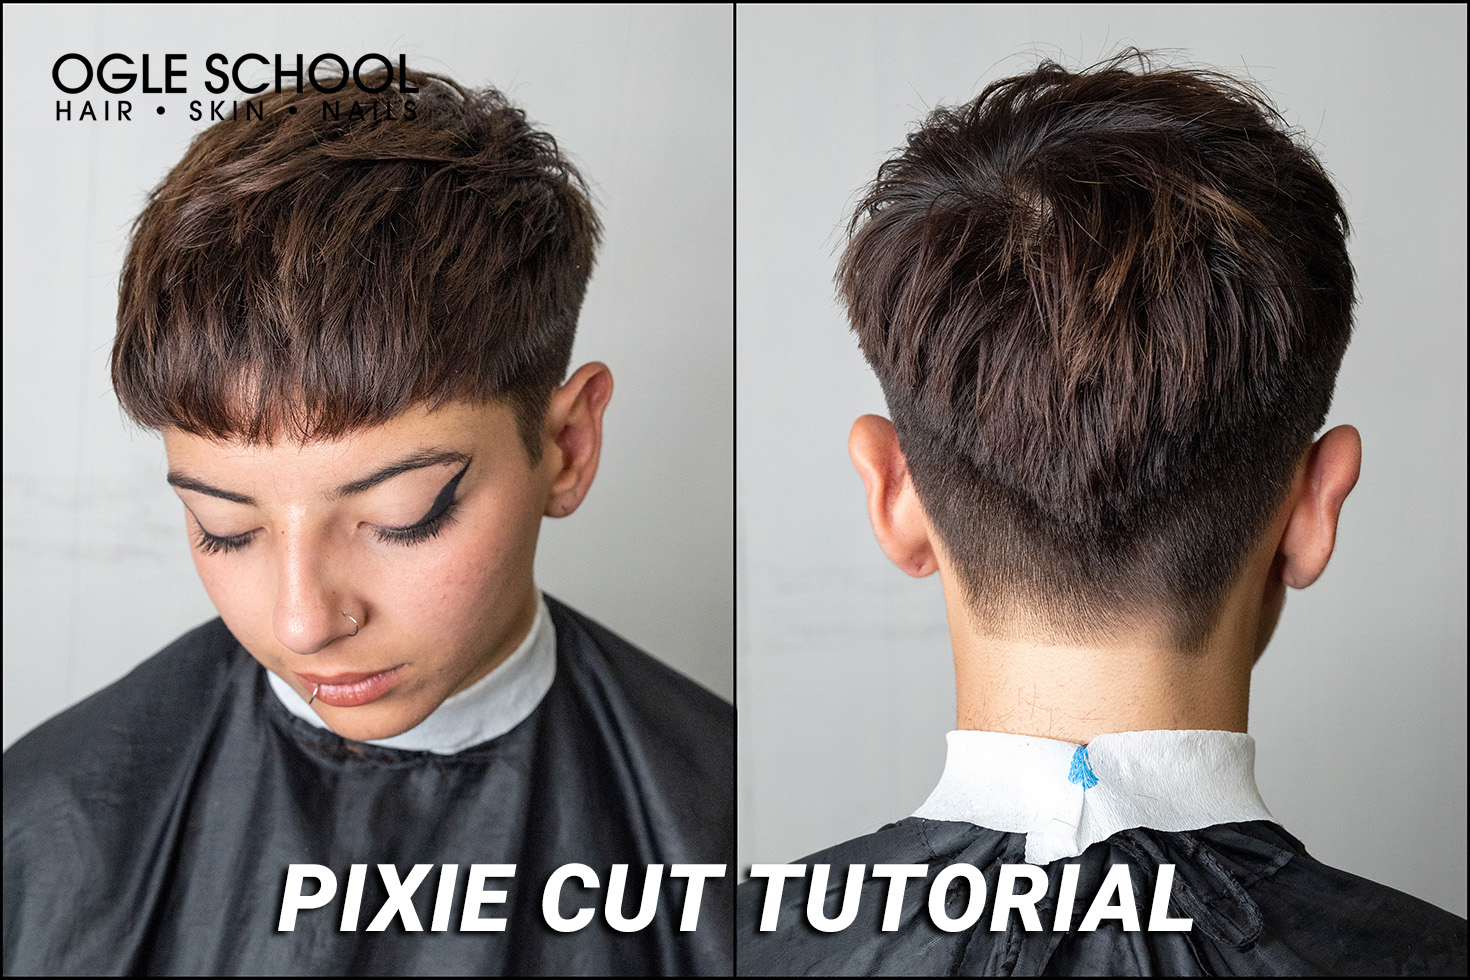 Learn How to do a Pixie Cut